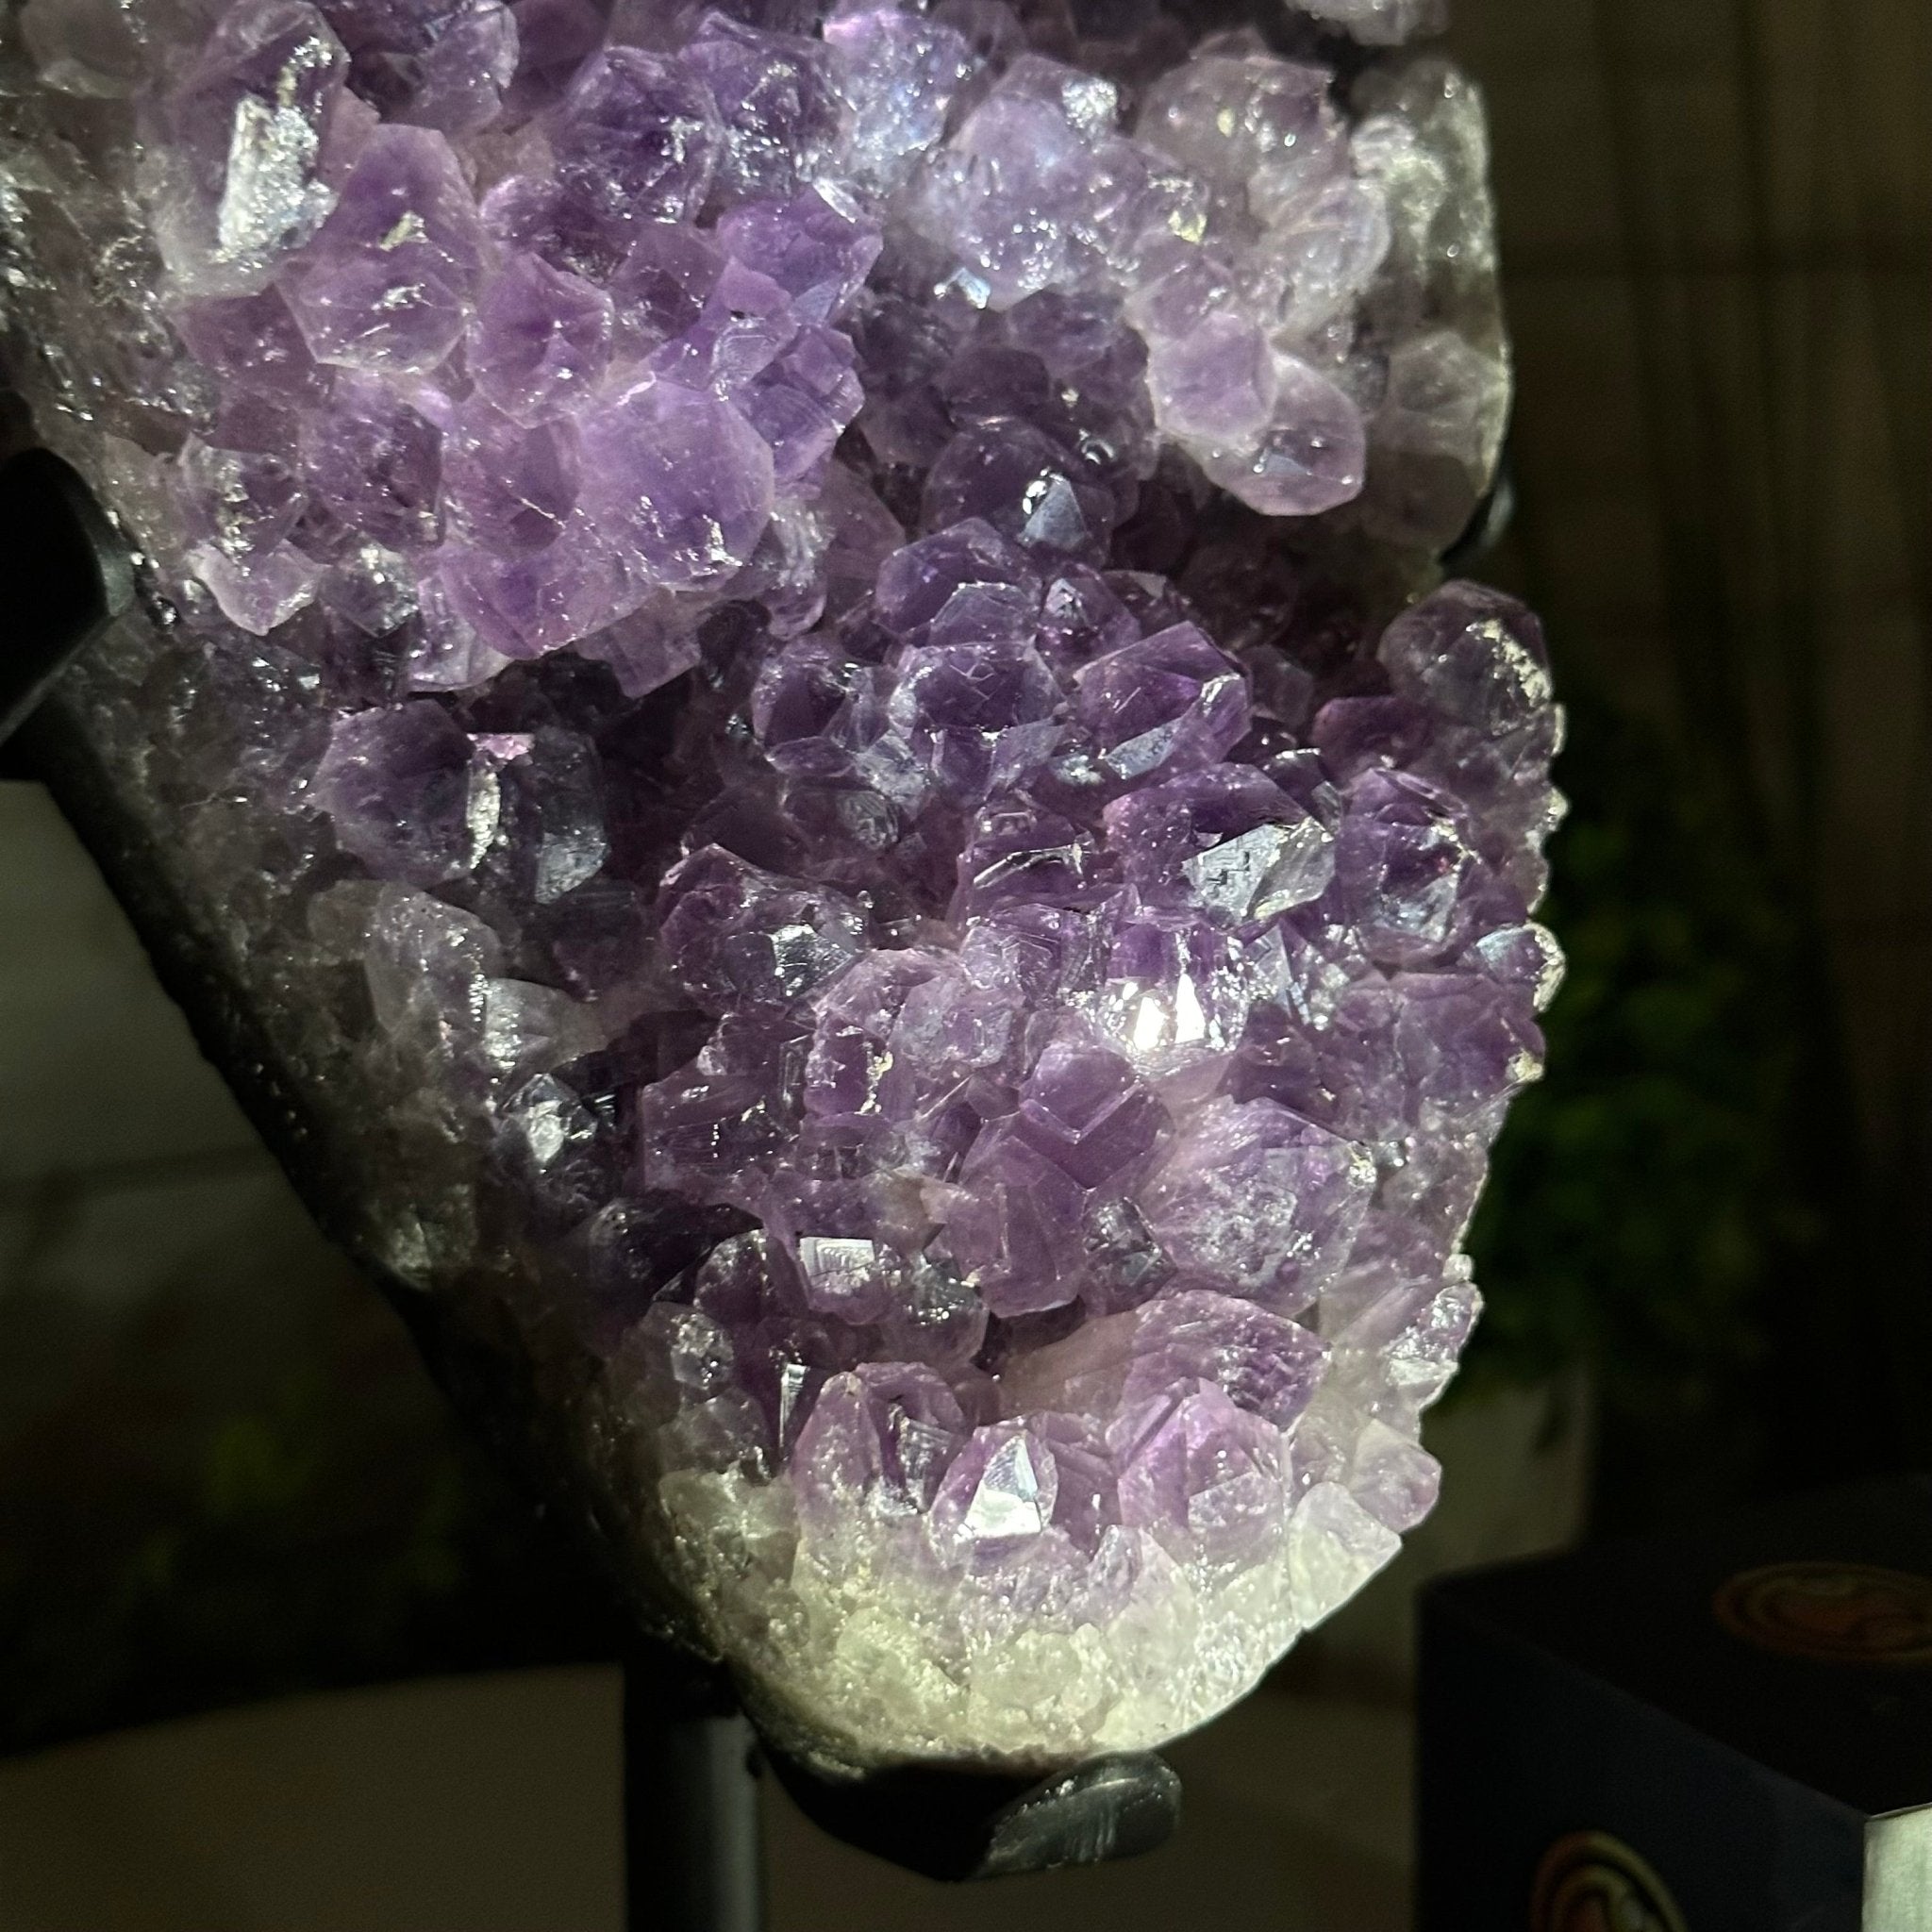 Quality Amethyst Cluster on a Metal Base, 9.3 lbs & 12.5" Tall #5491 - 0051 - Brazil GemsBrazil GemsQuality Amethyst Cluster on a Metal Base, 9.3 lbs & 12.5" Tall #5491 - 0051Clusters on Fixed Bases5491 - 0051